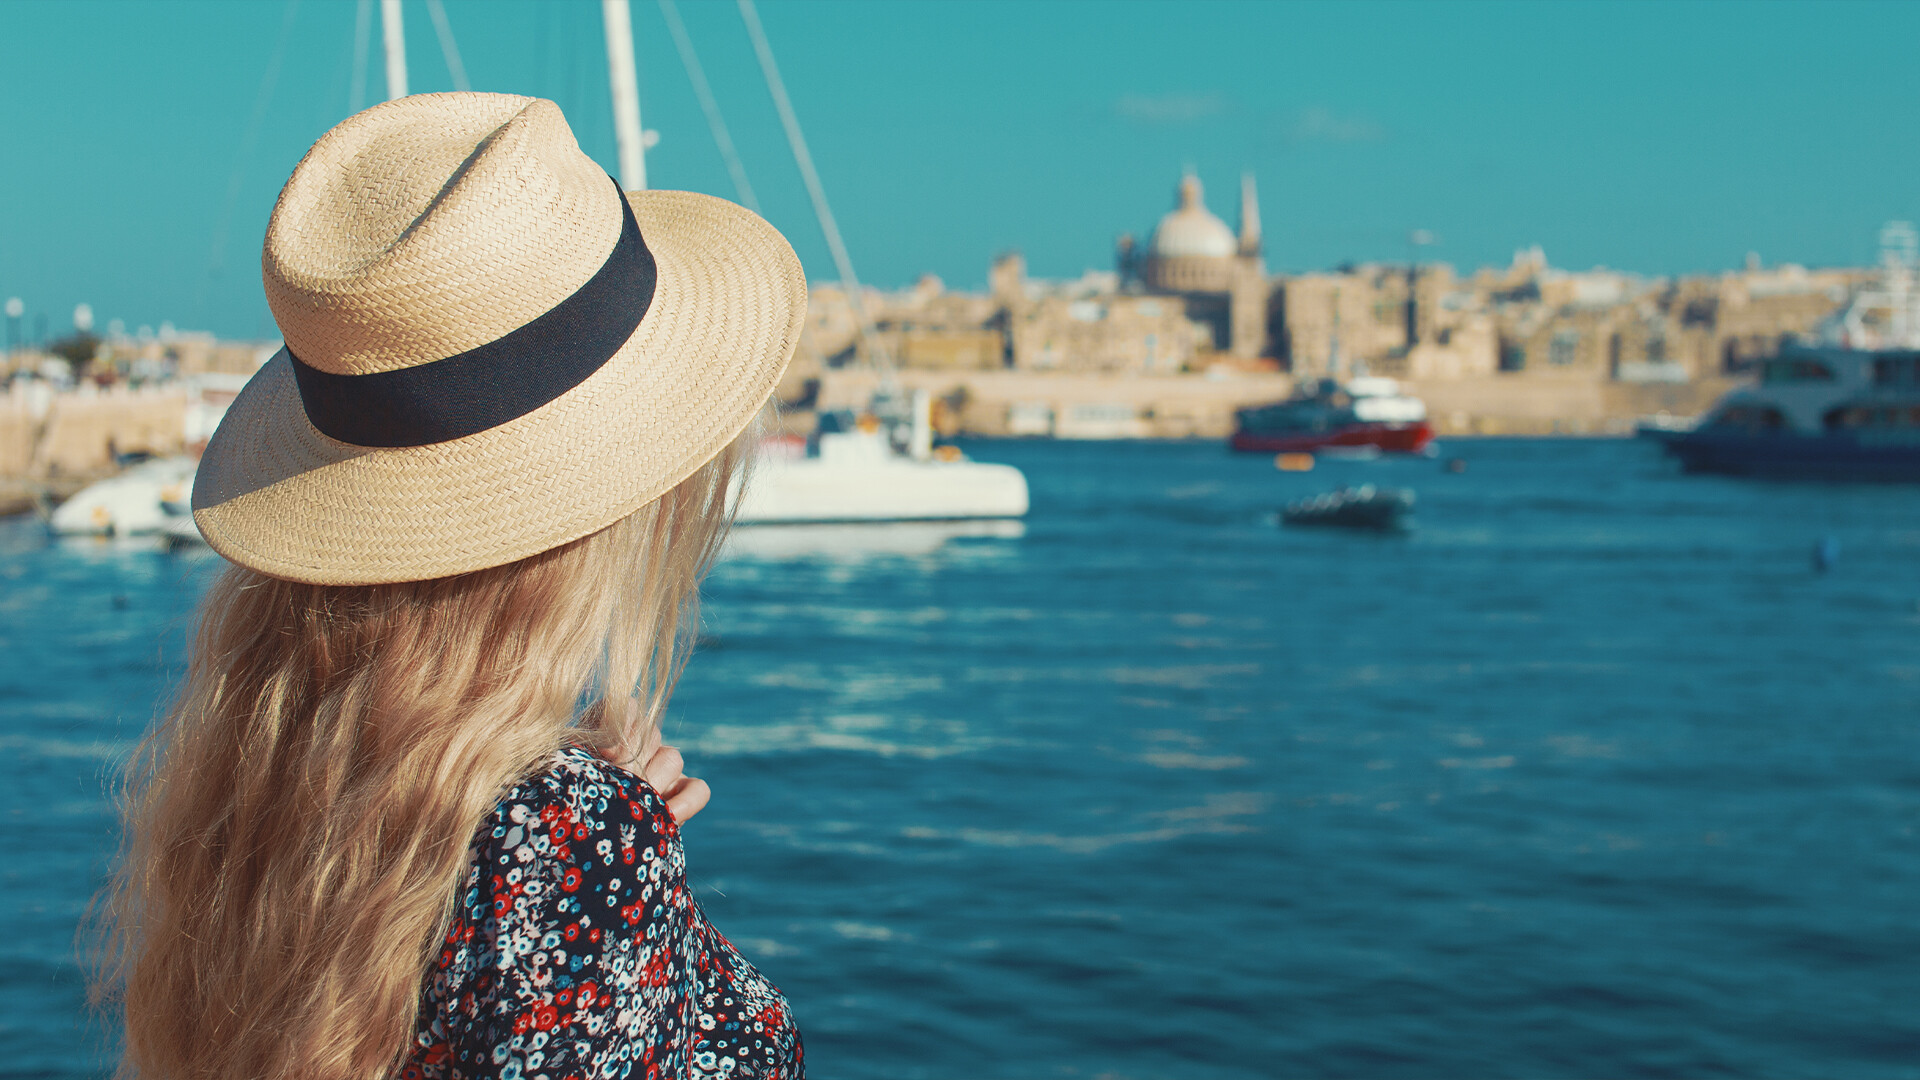 Things to do in Sliema Malta